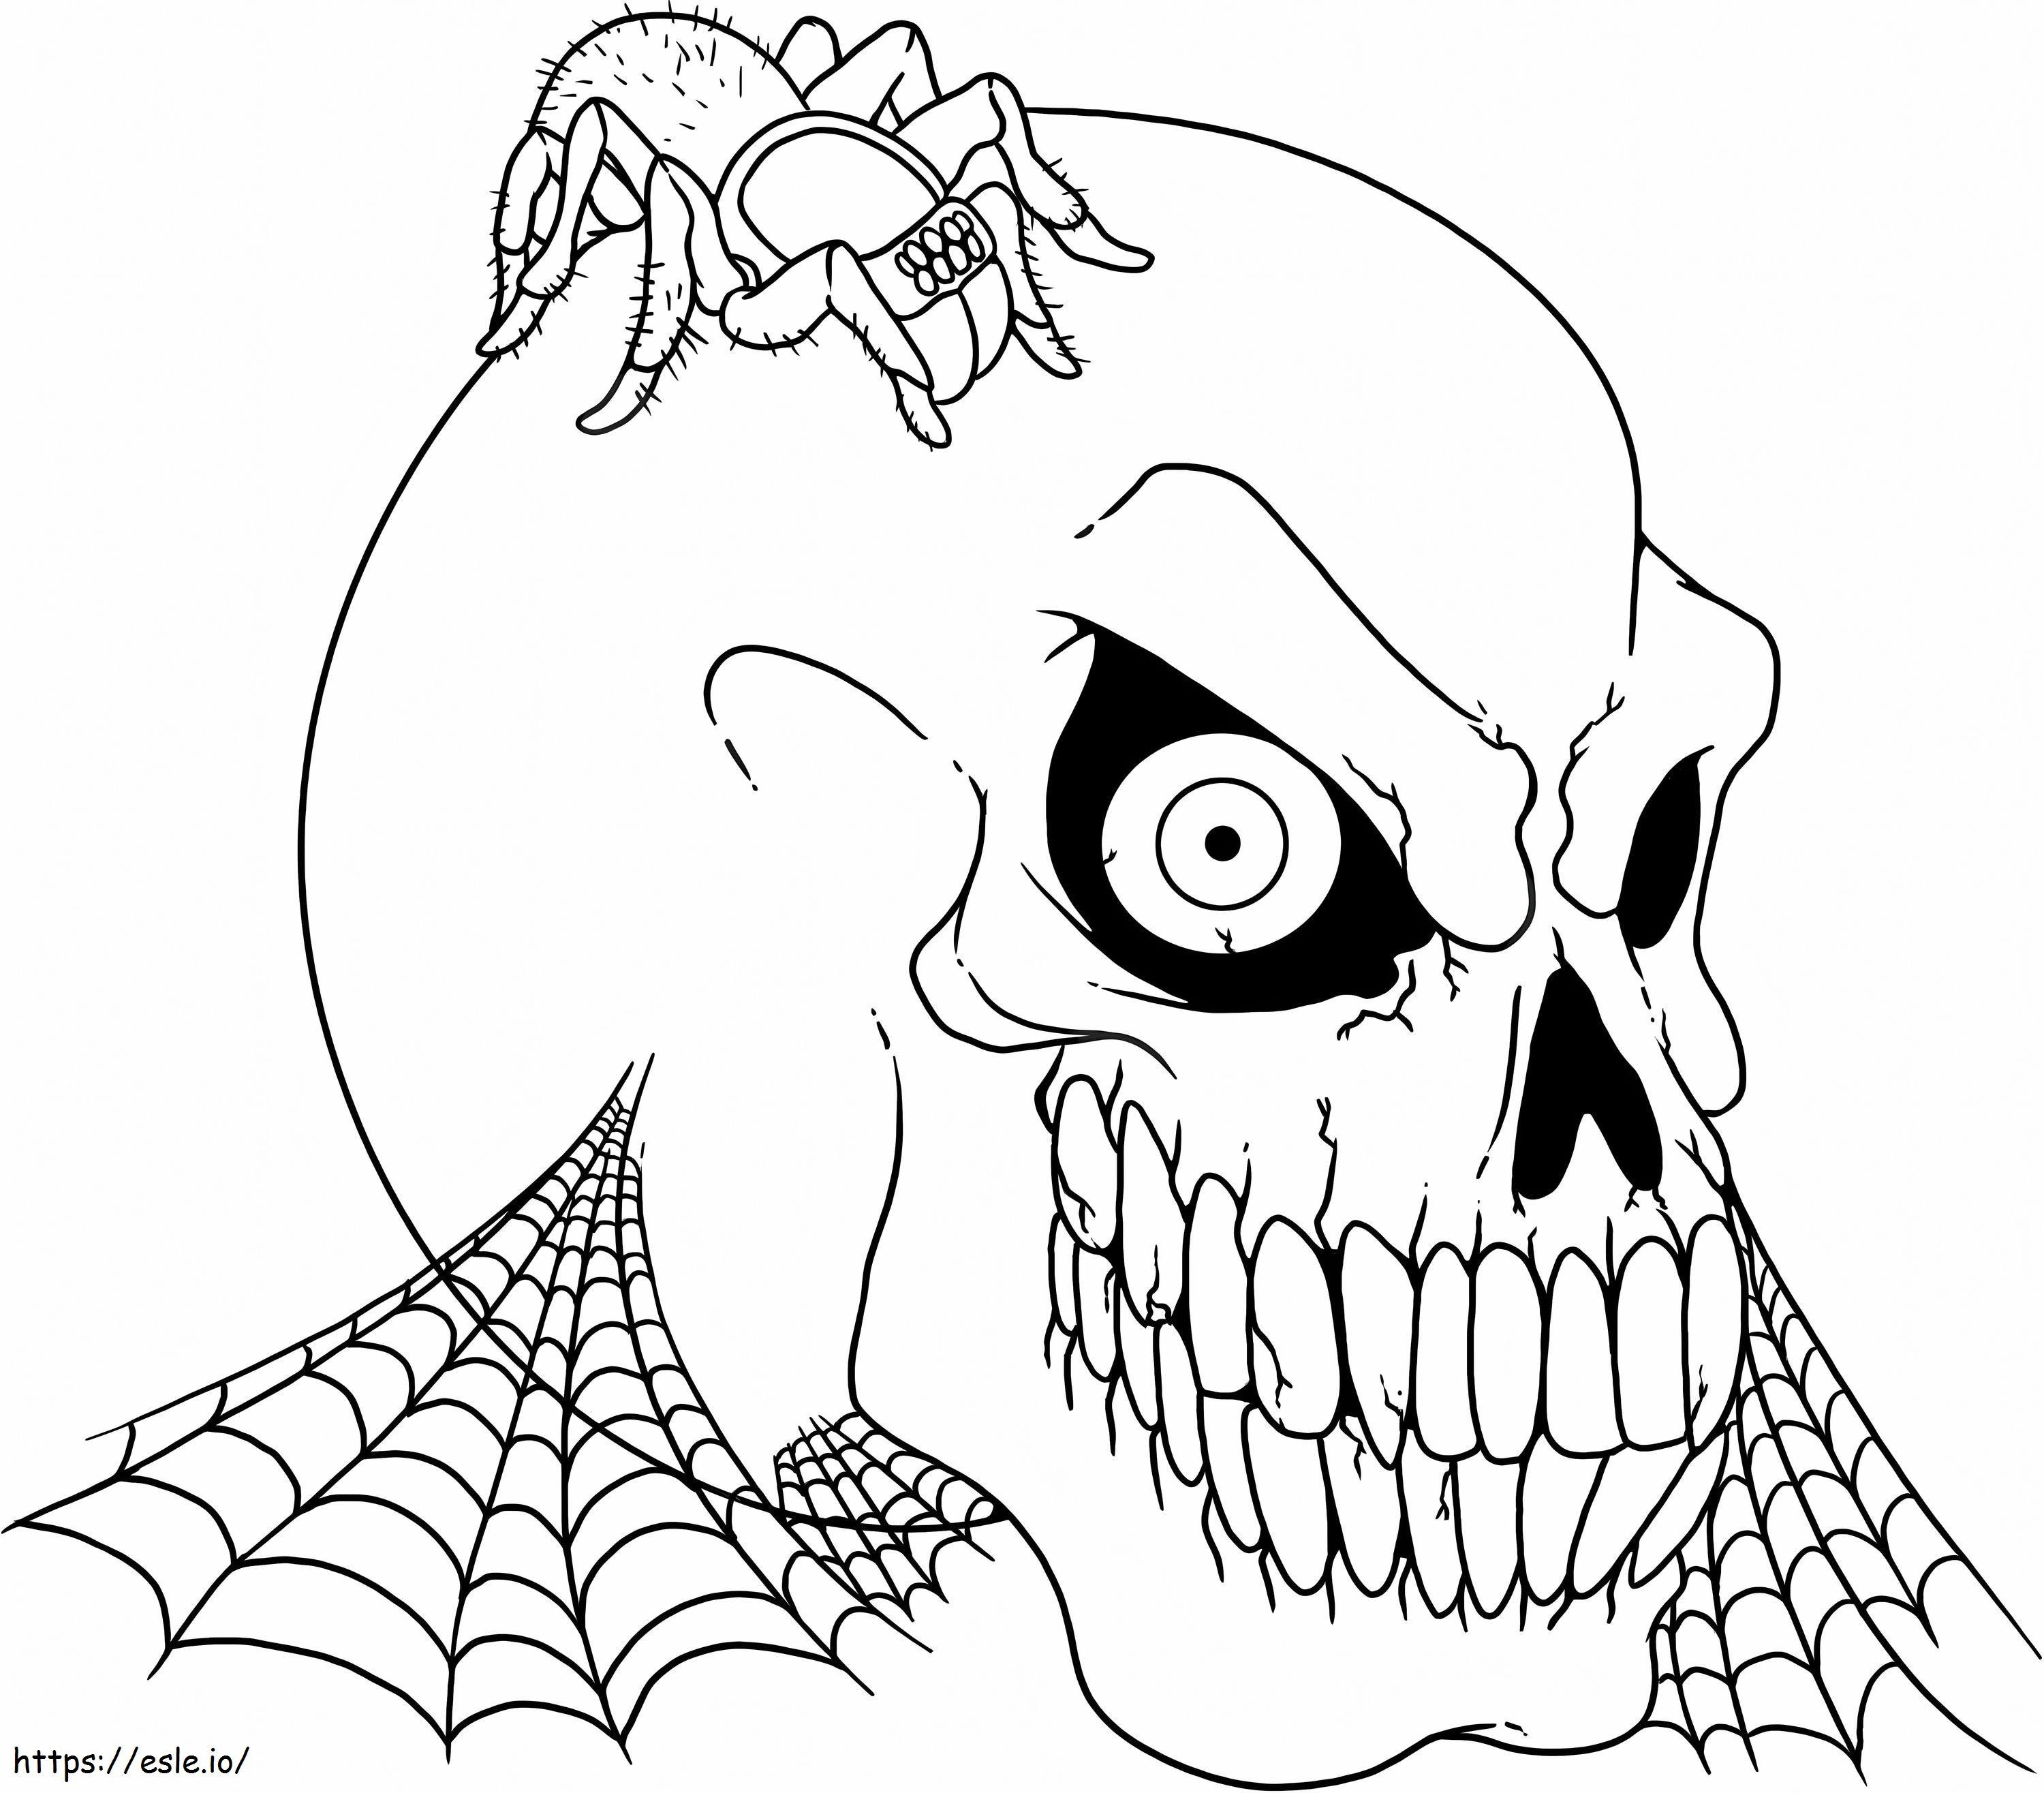 Creepy Skull With Spider coloring page